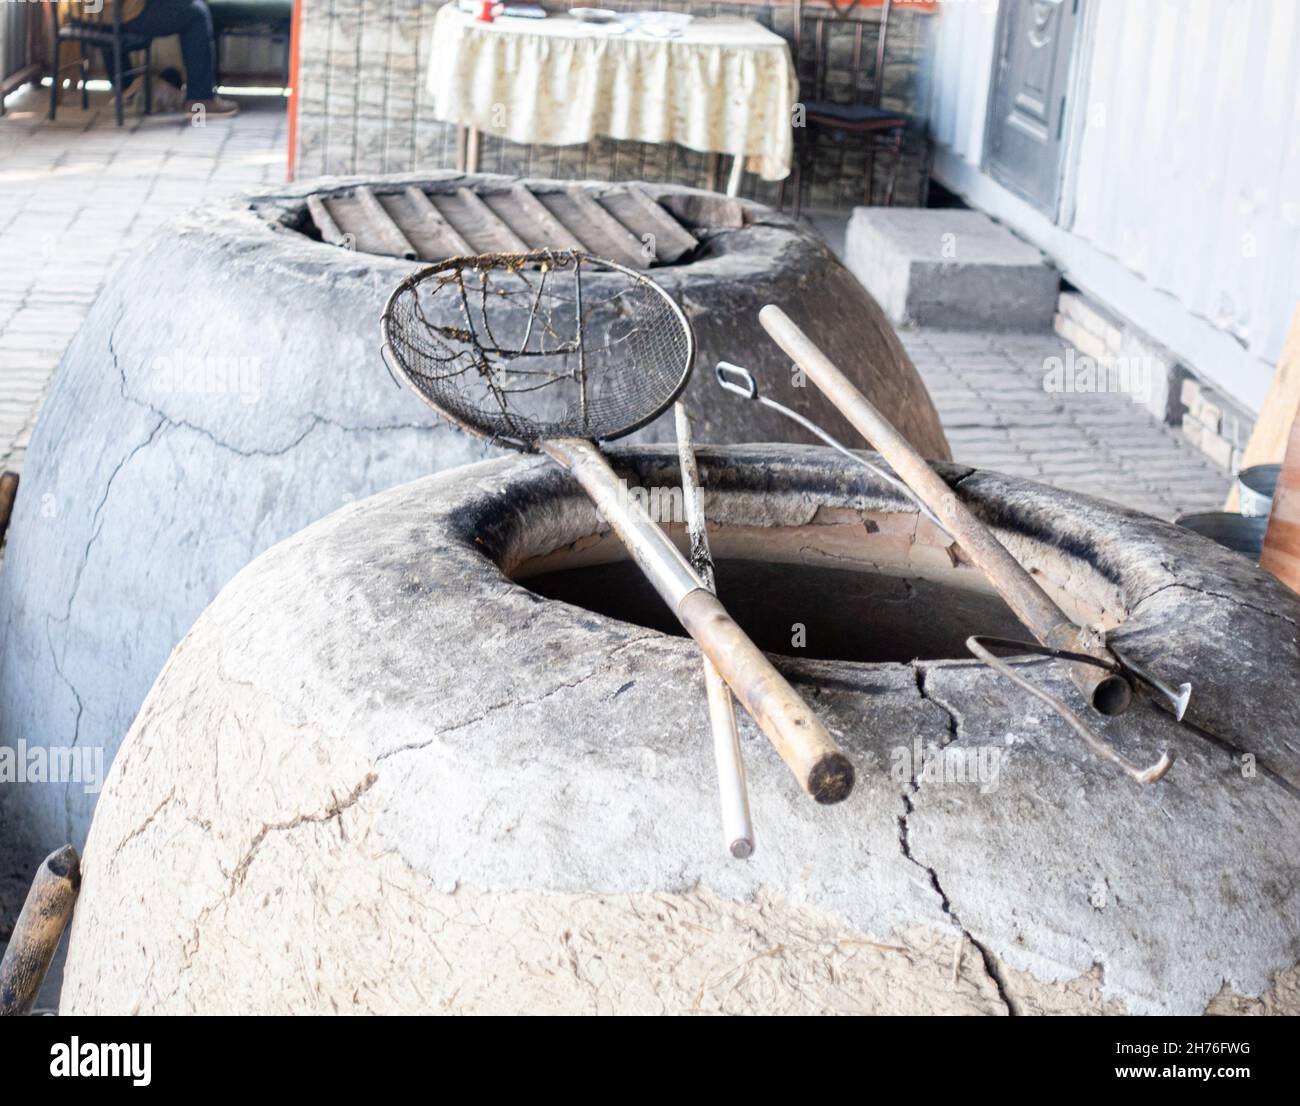 Tamdyr or tandyr-an oven for cooking traditional round bread tamdyr or tandyr sold in Central Asia. Near Almaty, Kazakhstan Stock Photo